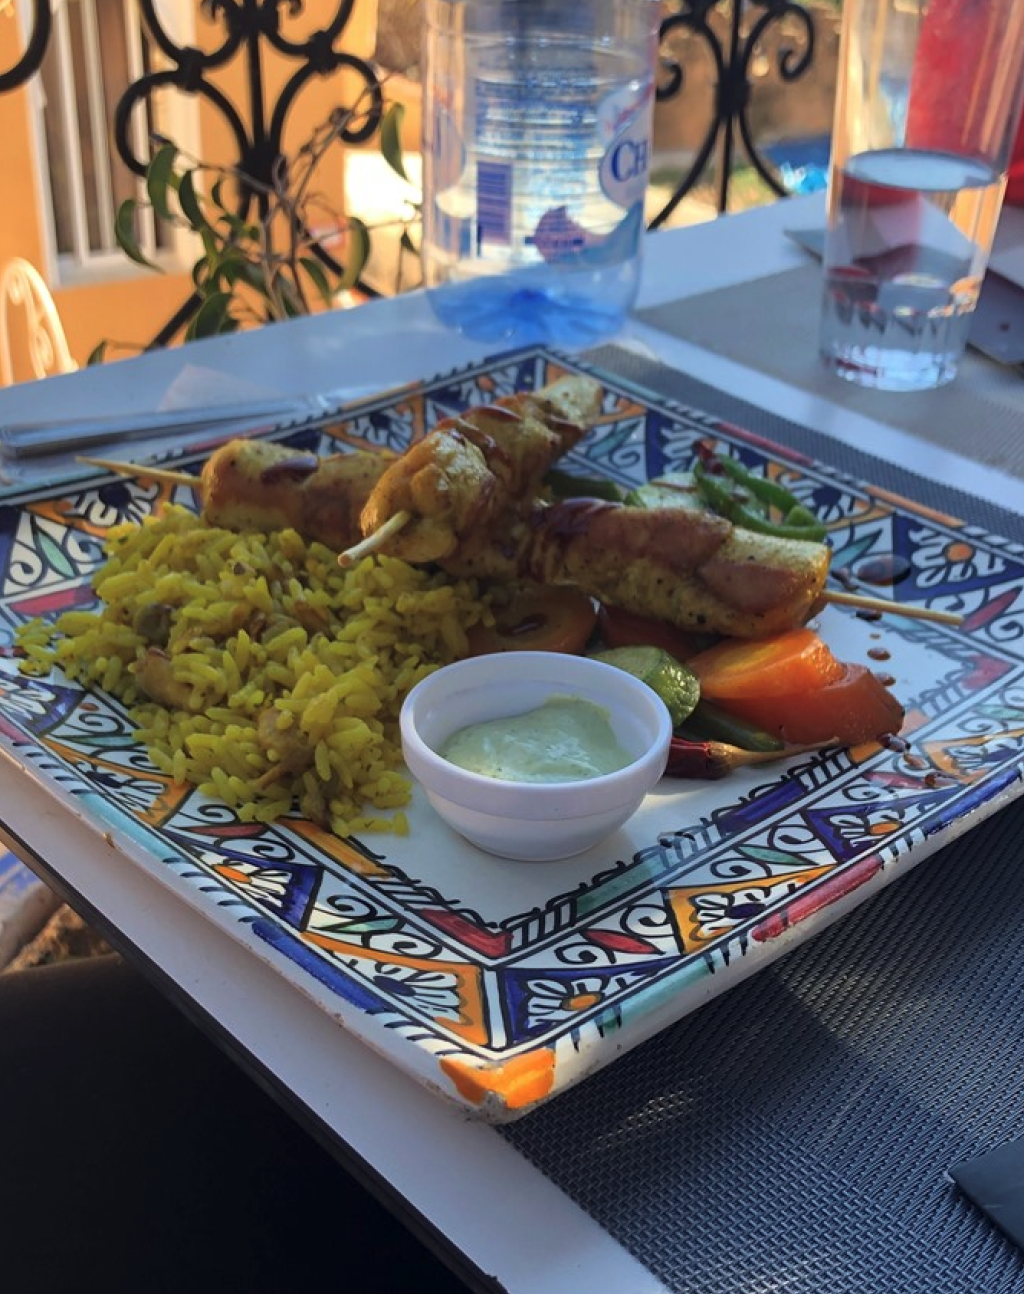 A plate of Moroccan food